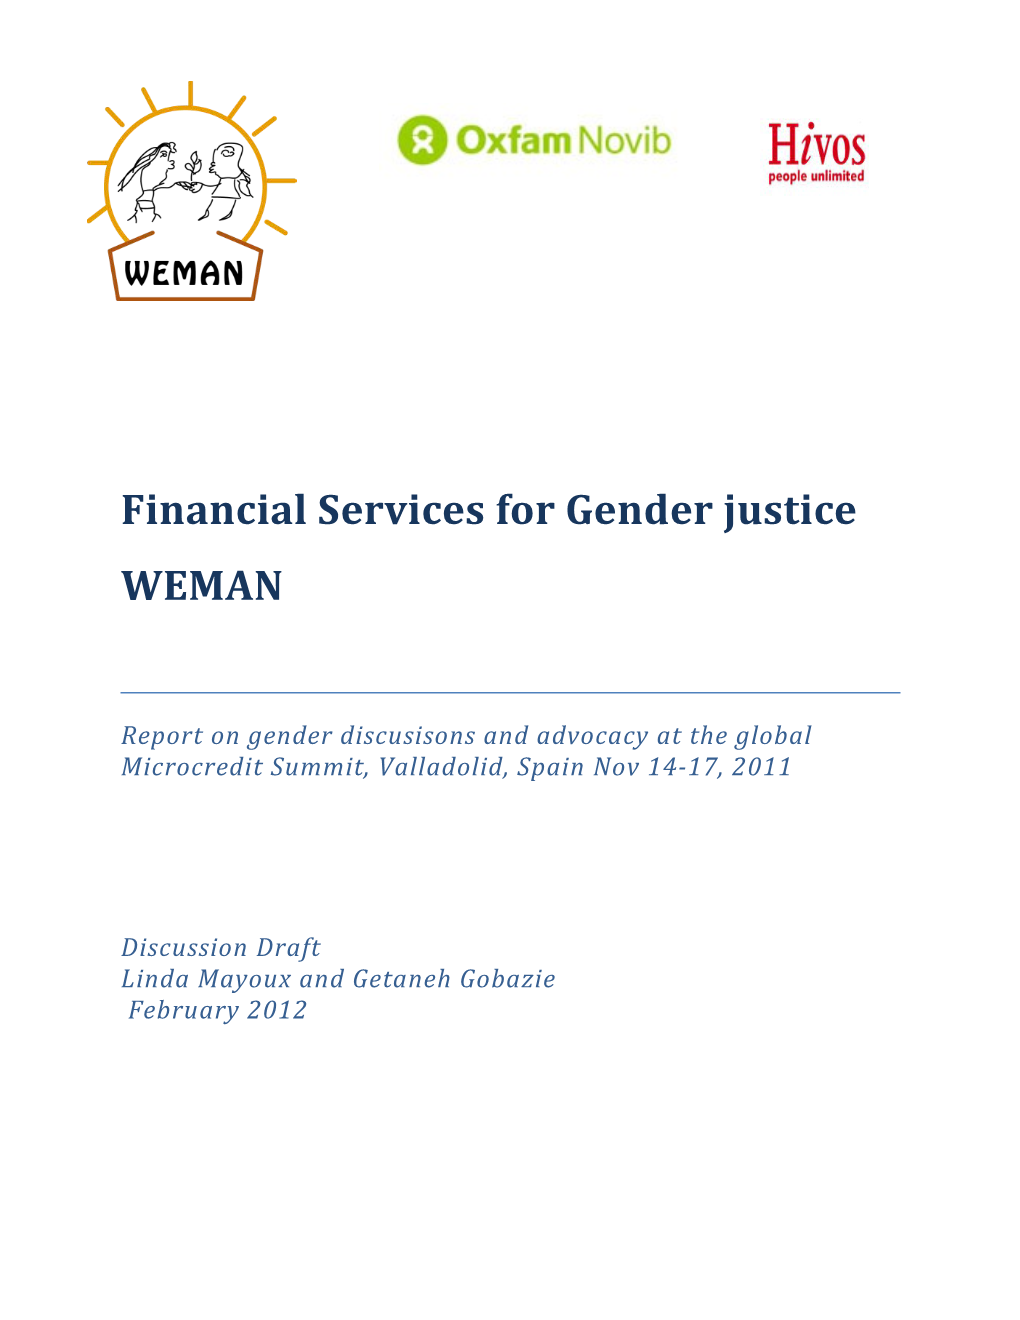 Financial Services for Gender Justice Report on Global MCS Valladolid Mayoux and Gobazie 2012